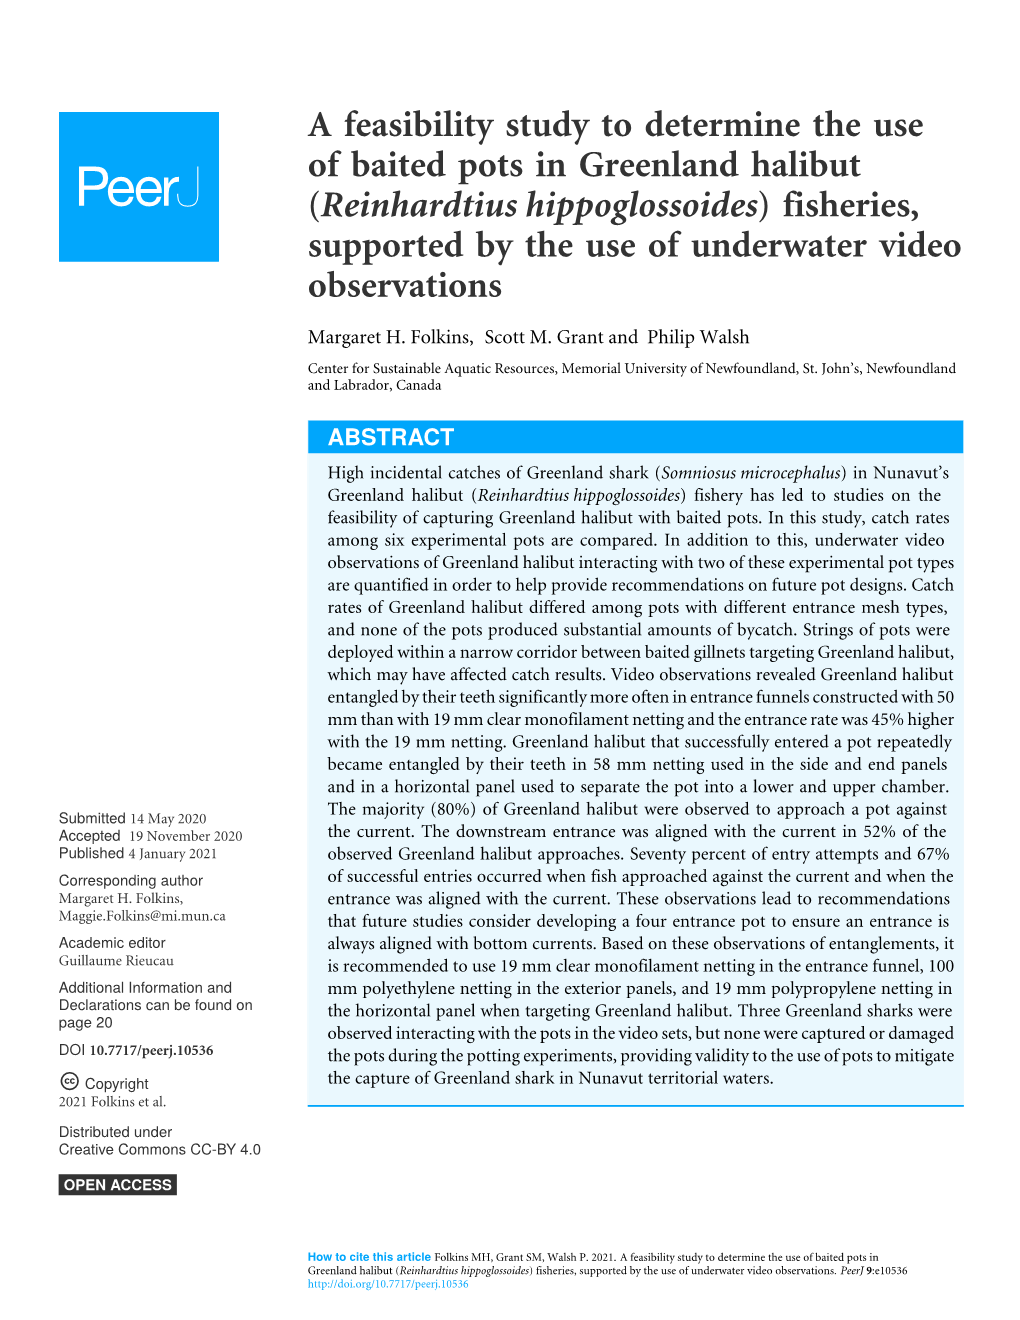 A Feasibility Study to Determine the Use of Baited Pots in Greenland Halibut